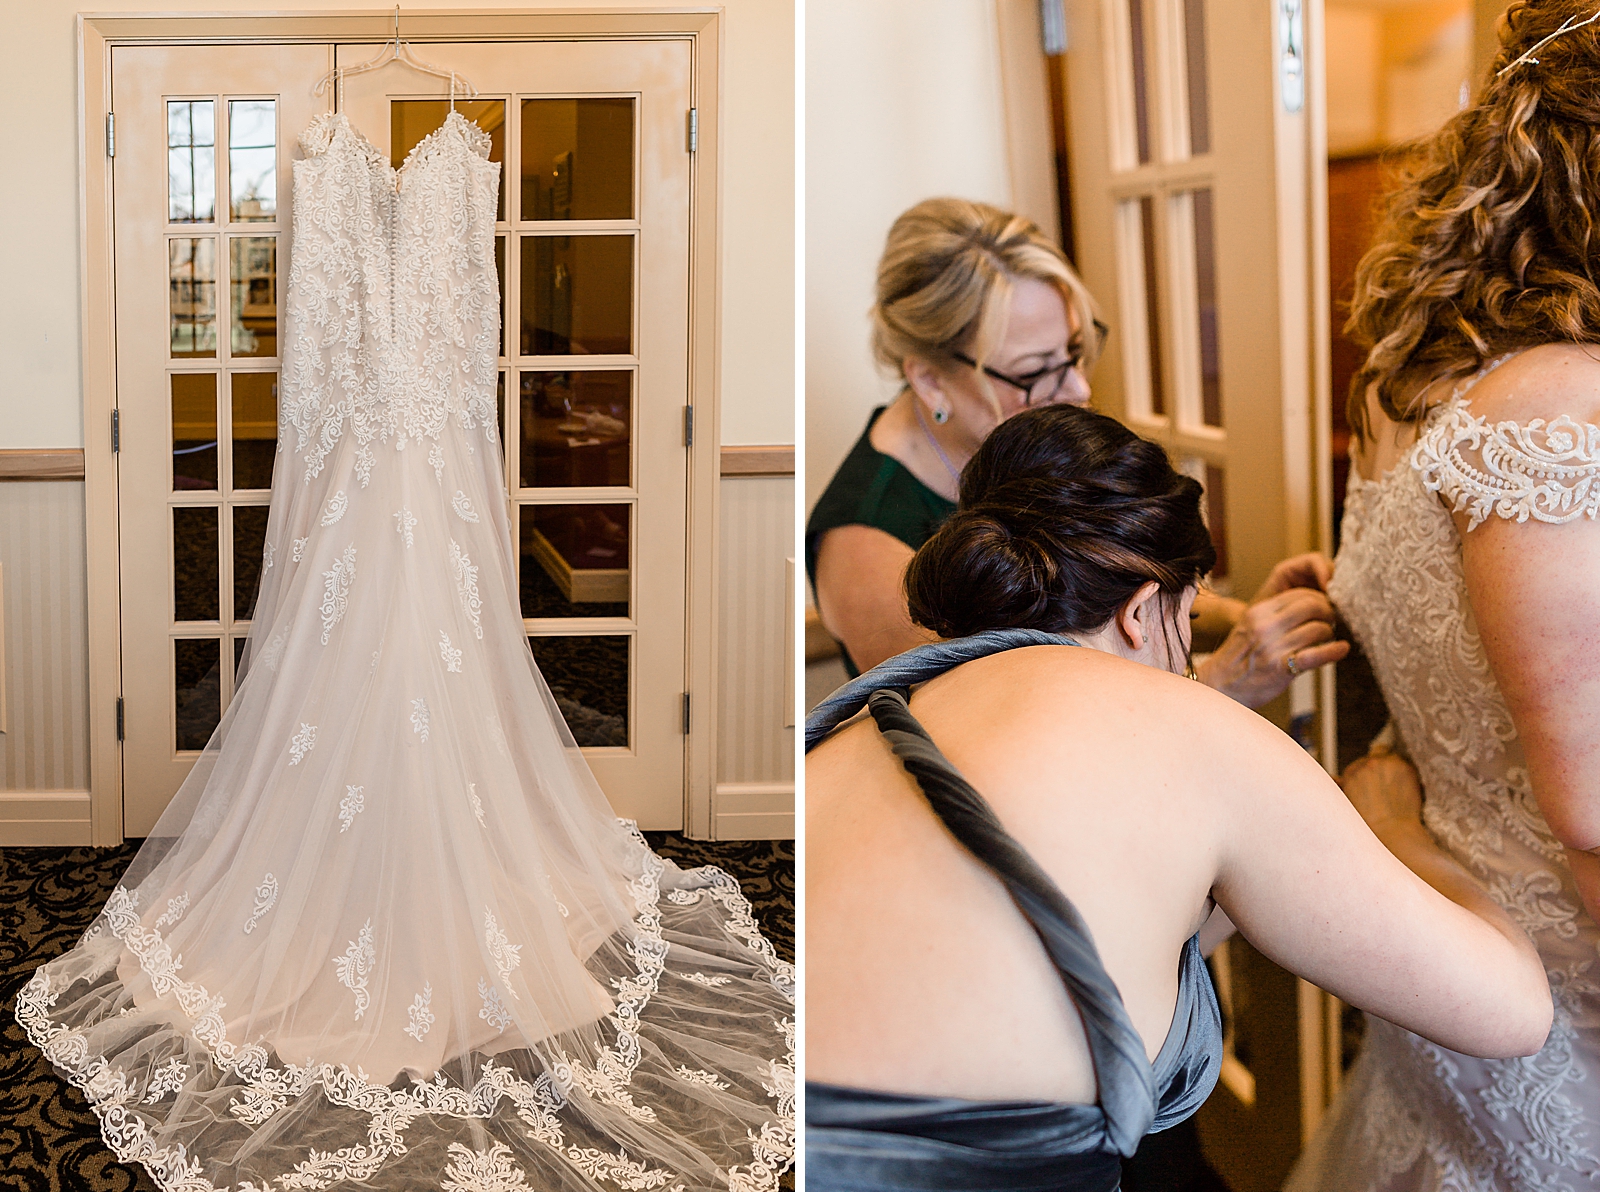 Wedding dress hanging on coat hanger on doors and Bride getting help buttoning dress Getting Ready 